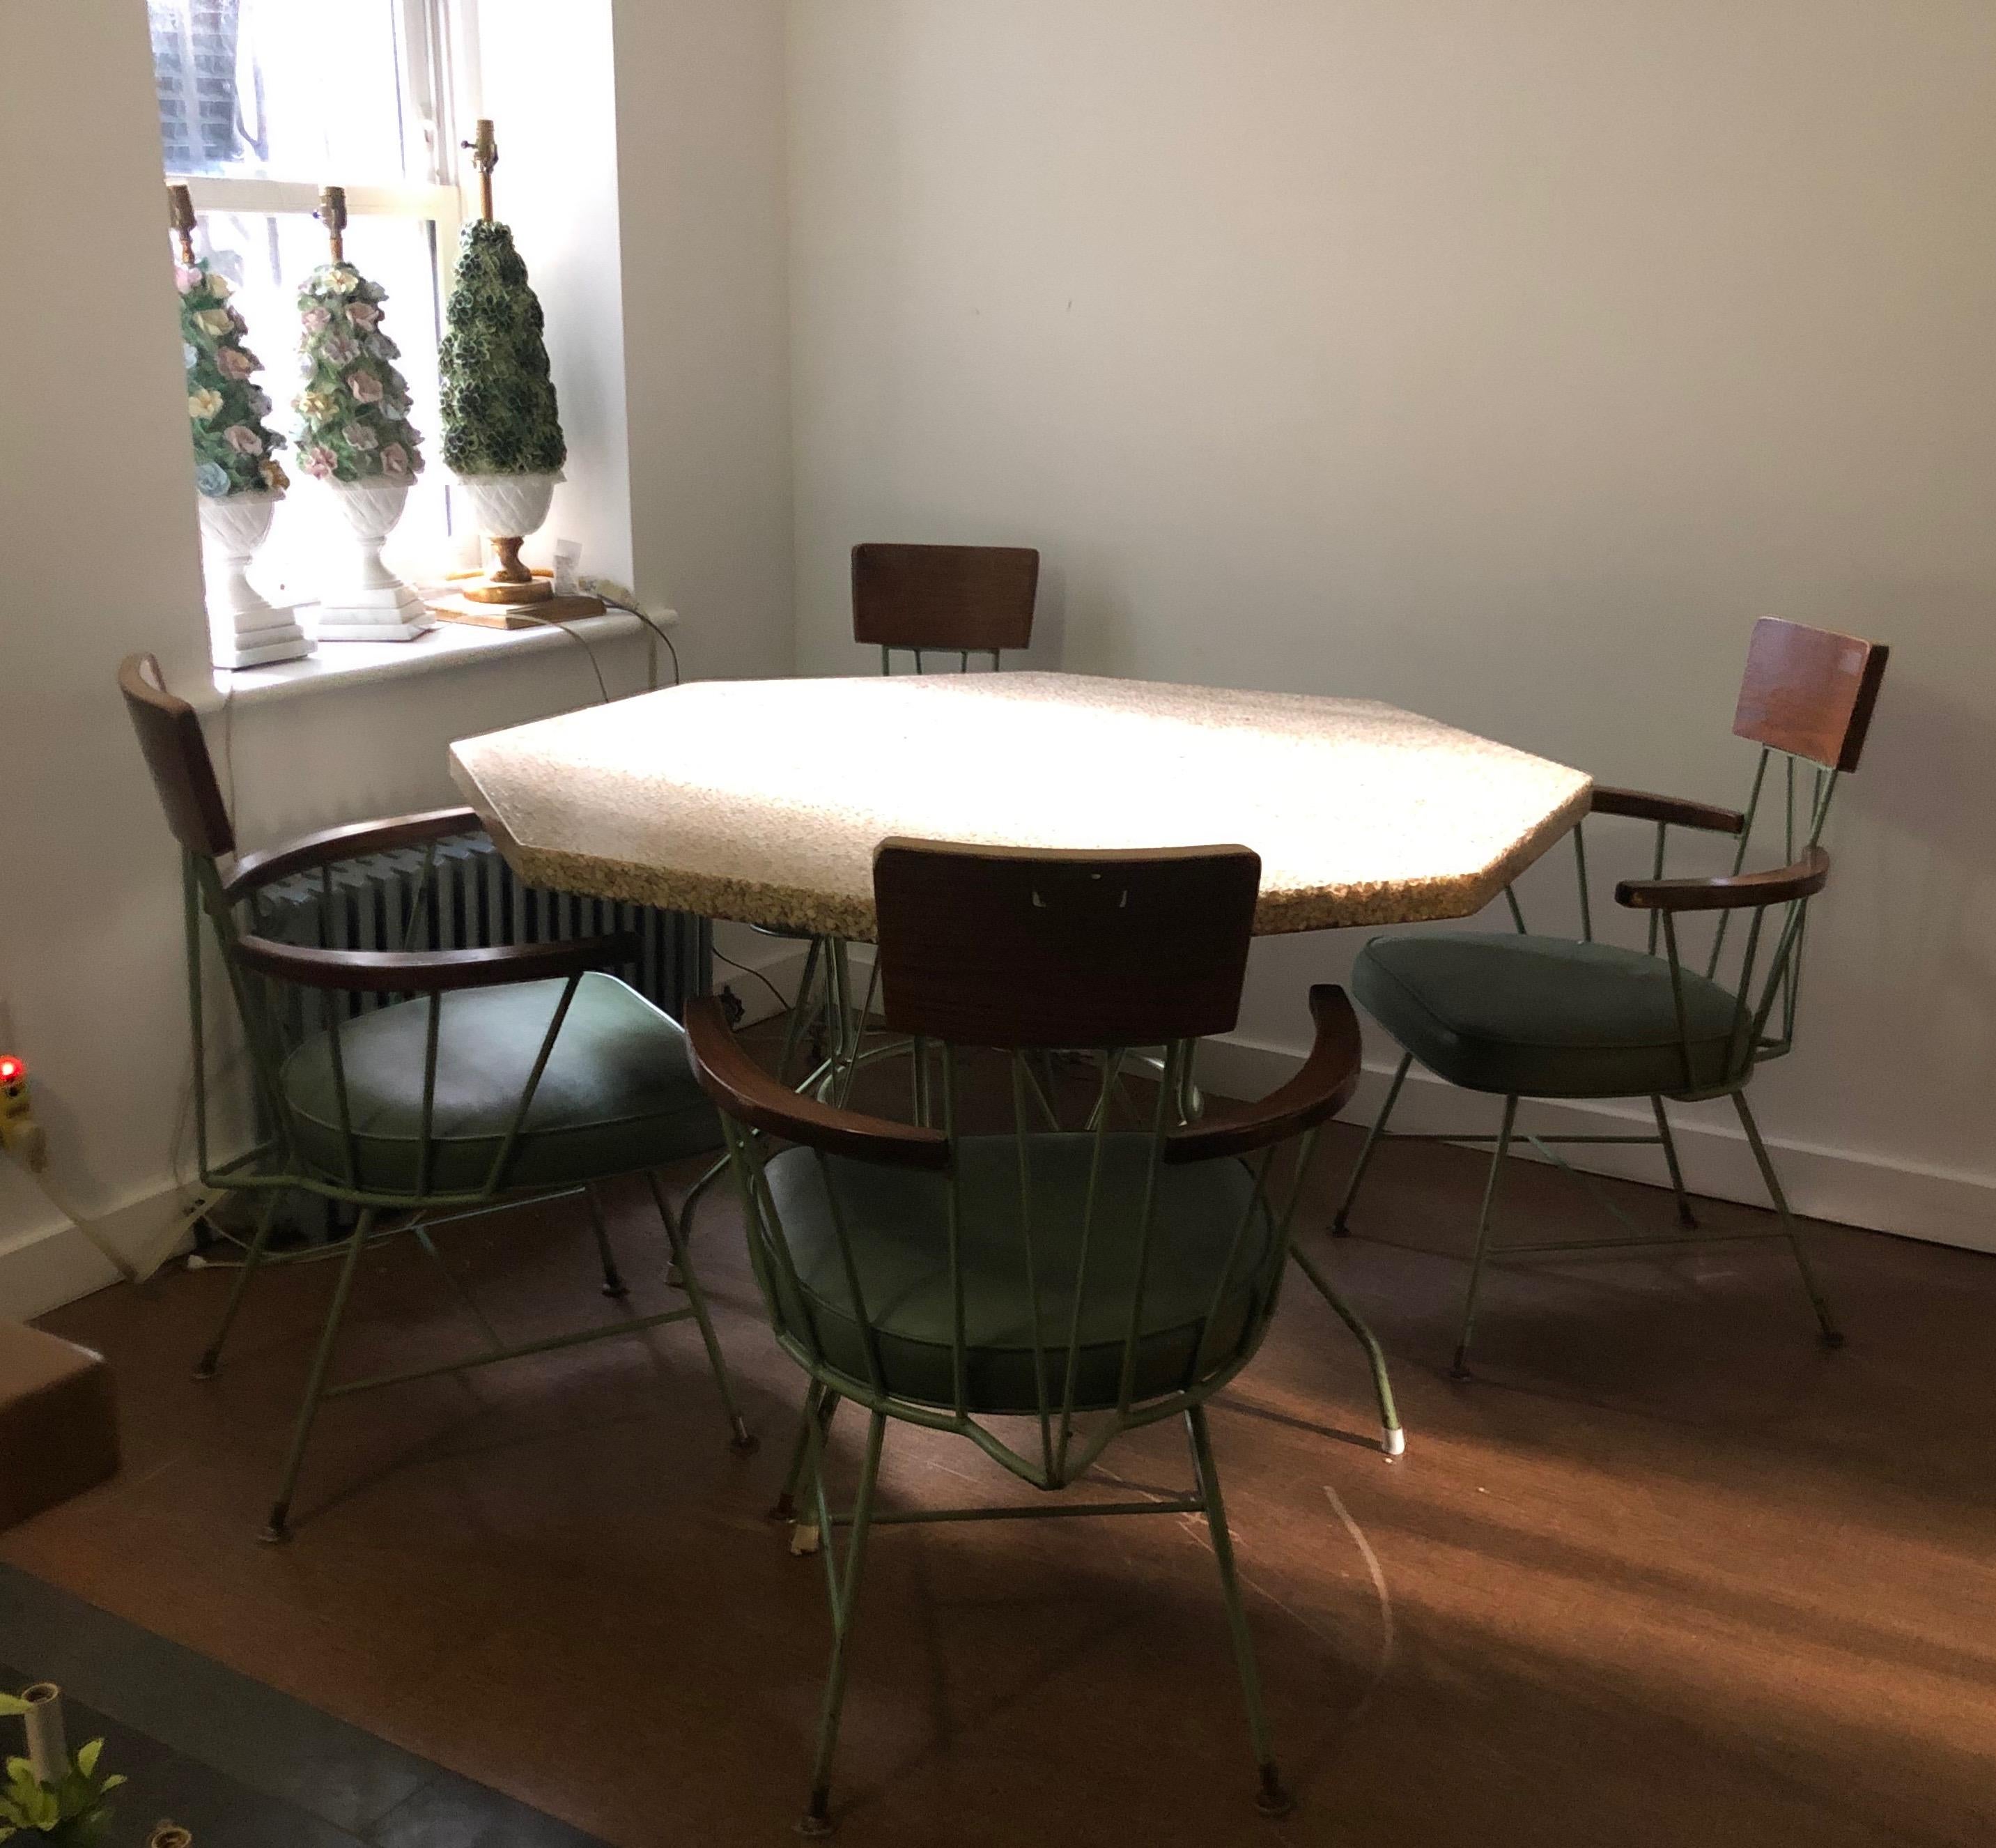 Midcentury Richard McCarthy Americana Iron Wood & Pebble Dining Set 4 armchairs.

Vintage green wrought iron and ashwood pebble-top dinette / kitchenette set for four.

Mid-Century Modern dining suite consisting of a table and four chairs. The table